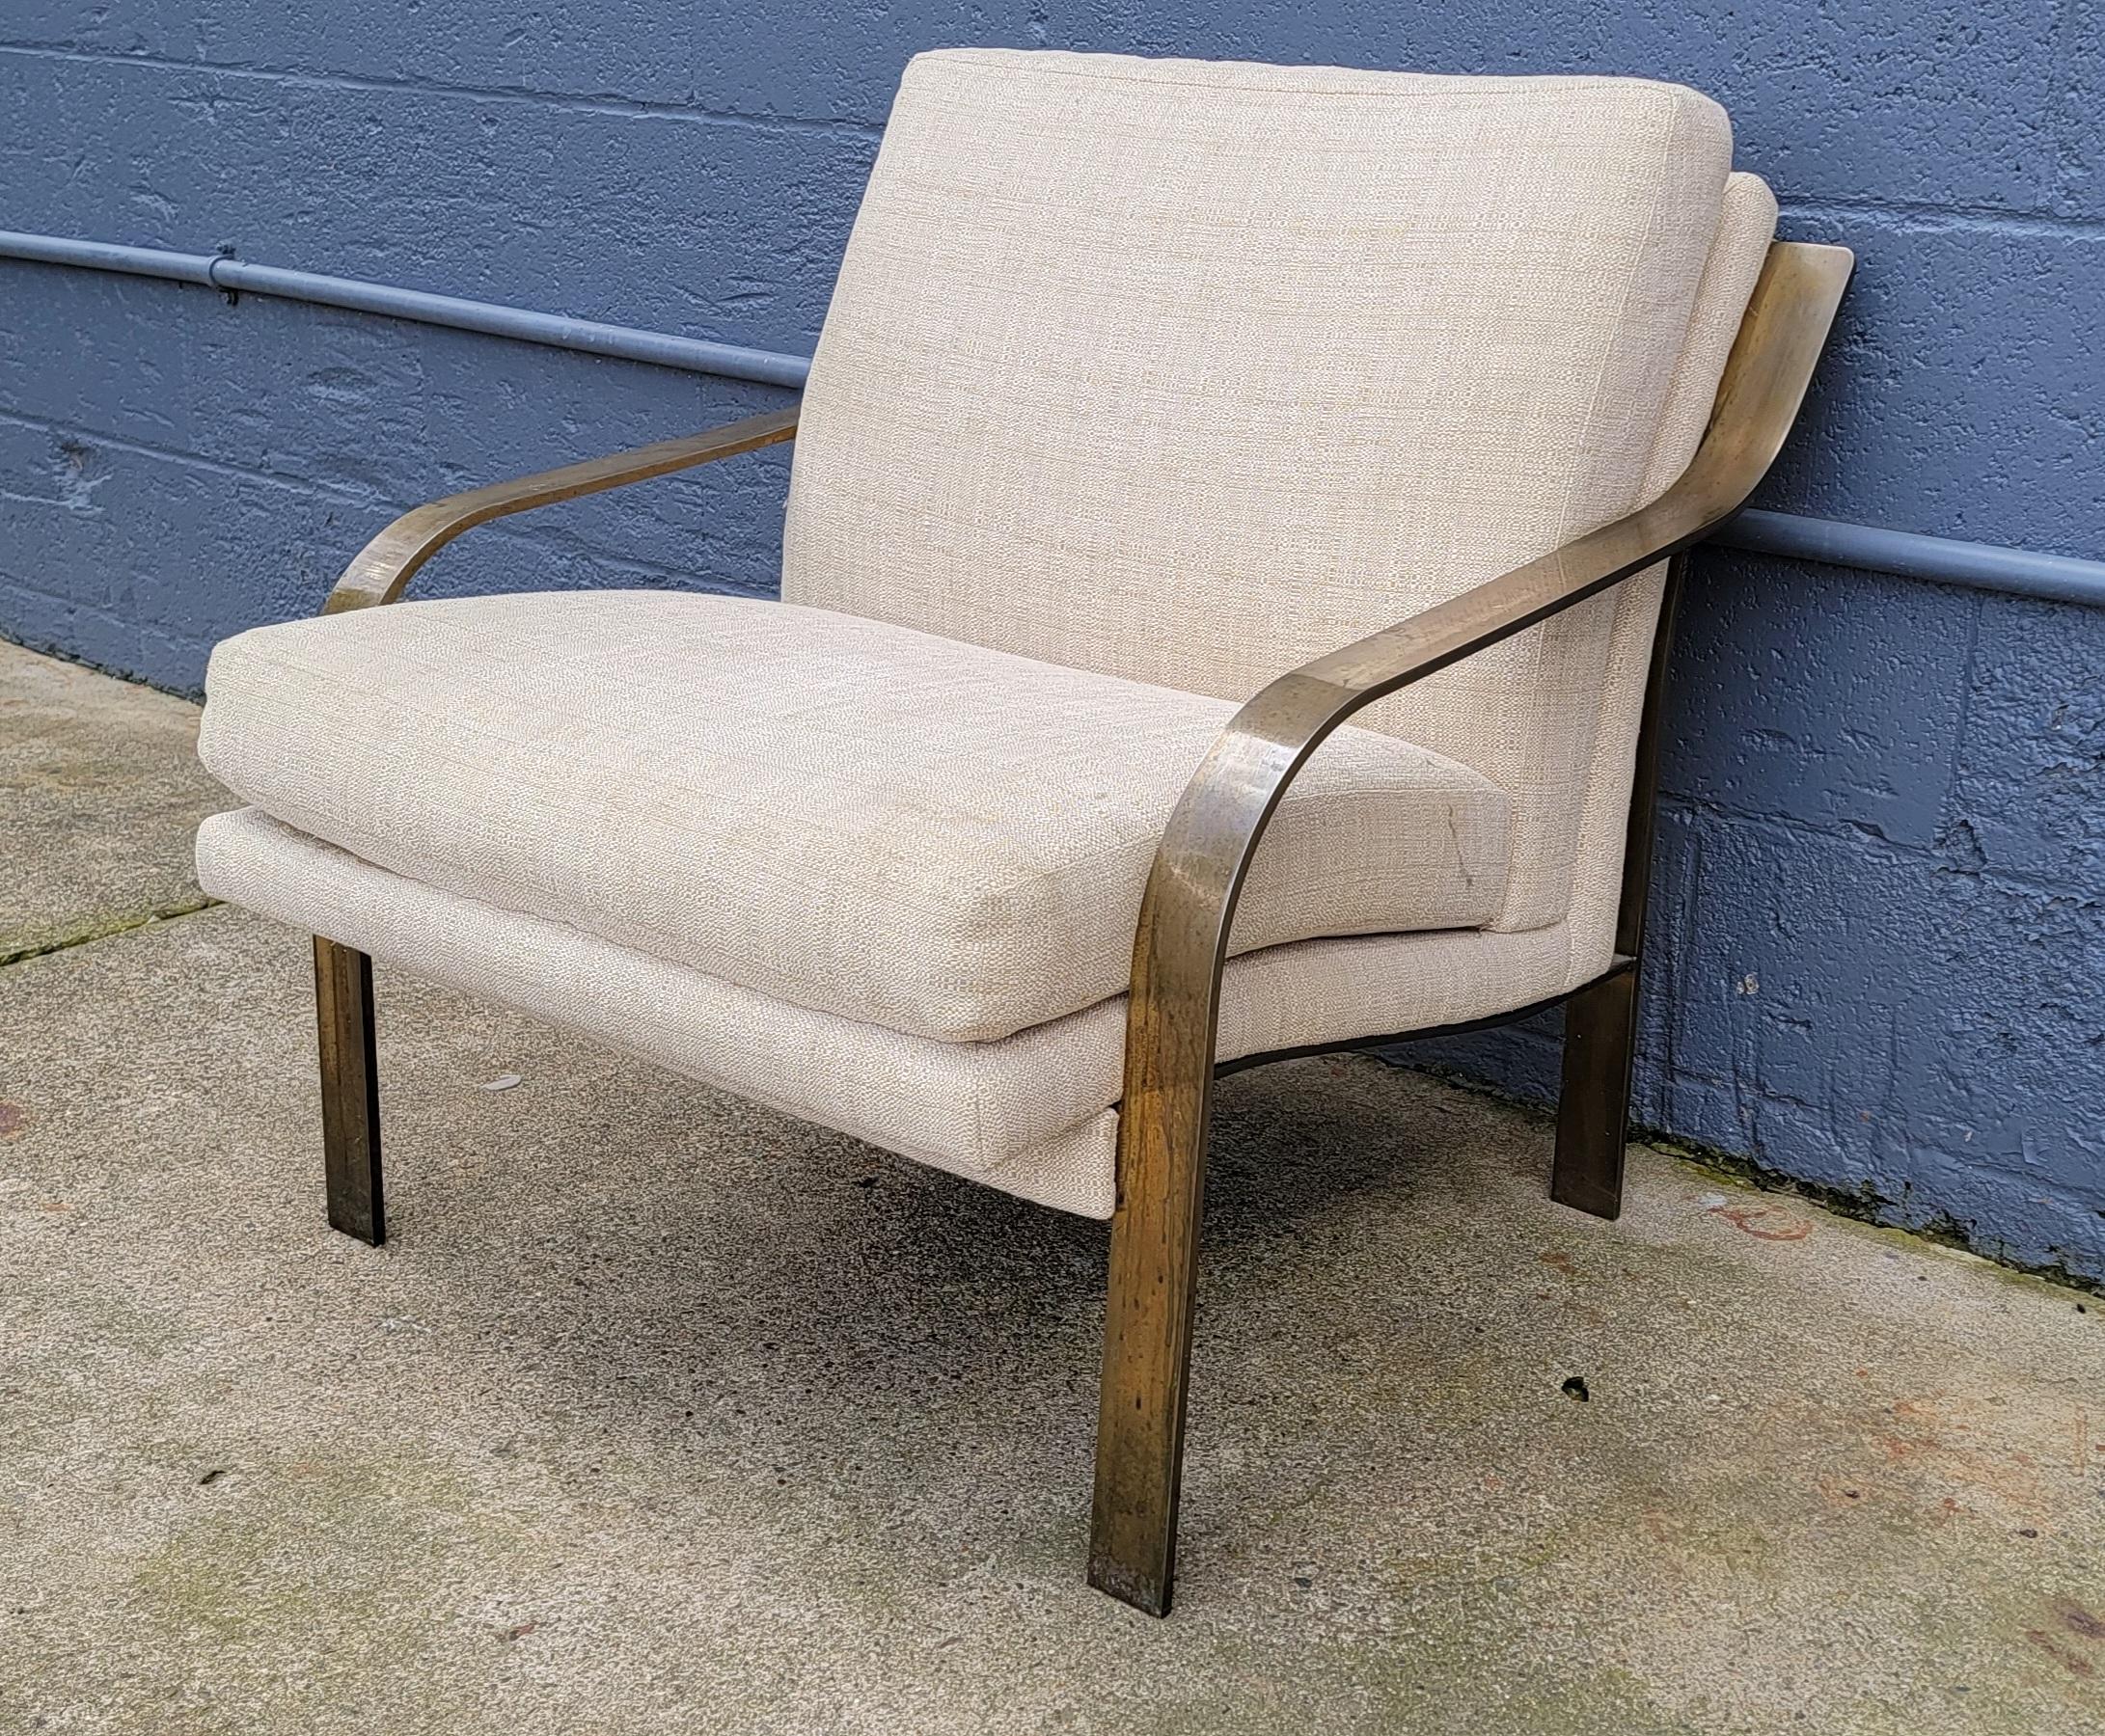 Unusual flat bar steel lounge chair designed in the manner of Milo Baughman. Fine quality craftsmanship, very sturdy and comfortable chair. Substantial, solid steel frame appears to have a brass plating. Discoloration (patina) to metal frame,